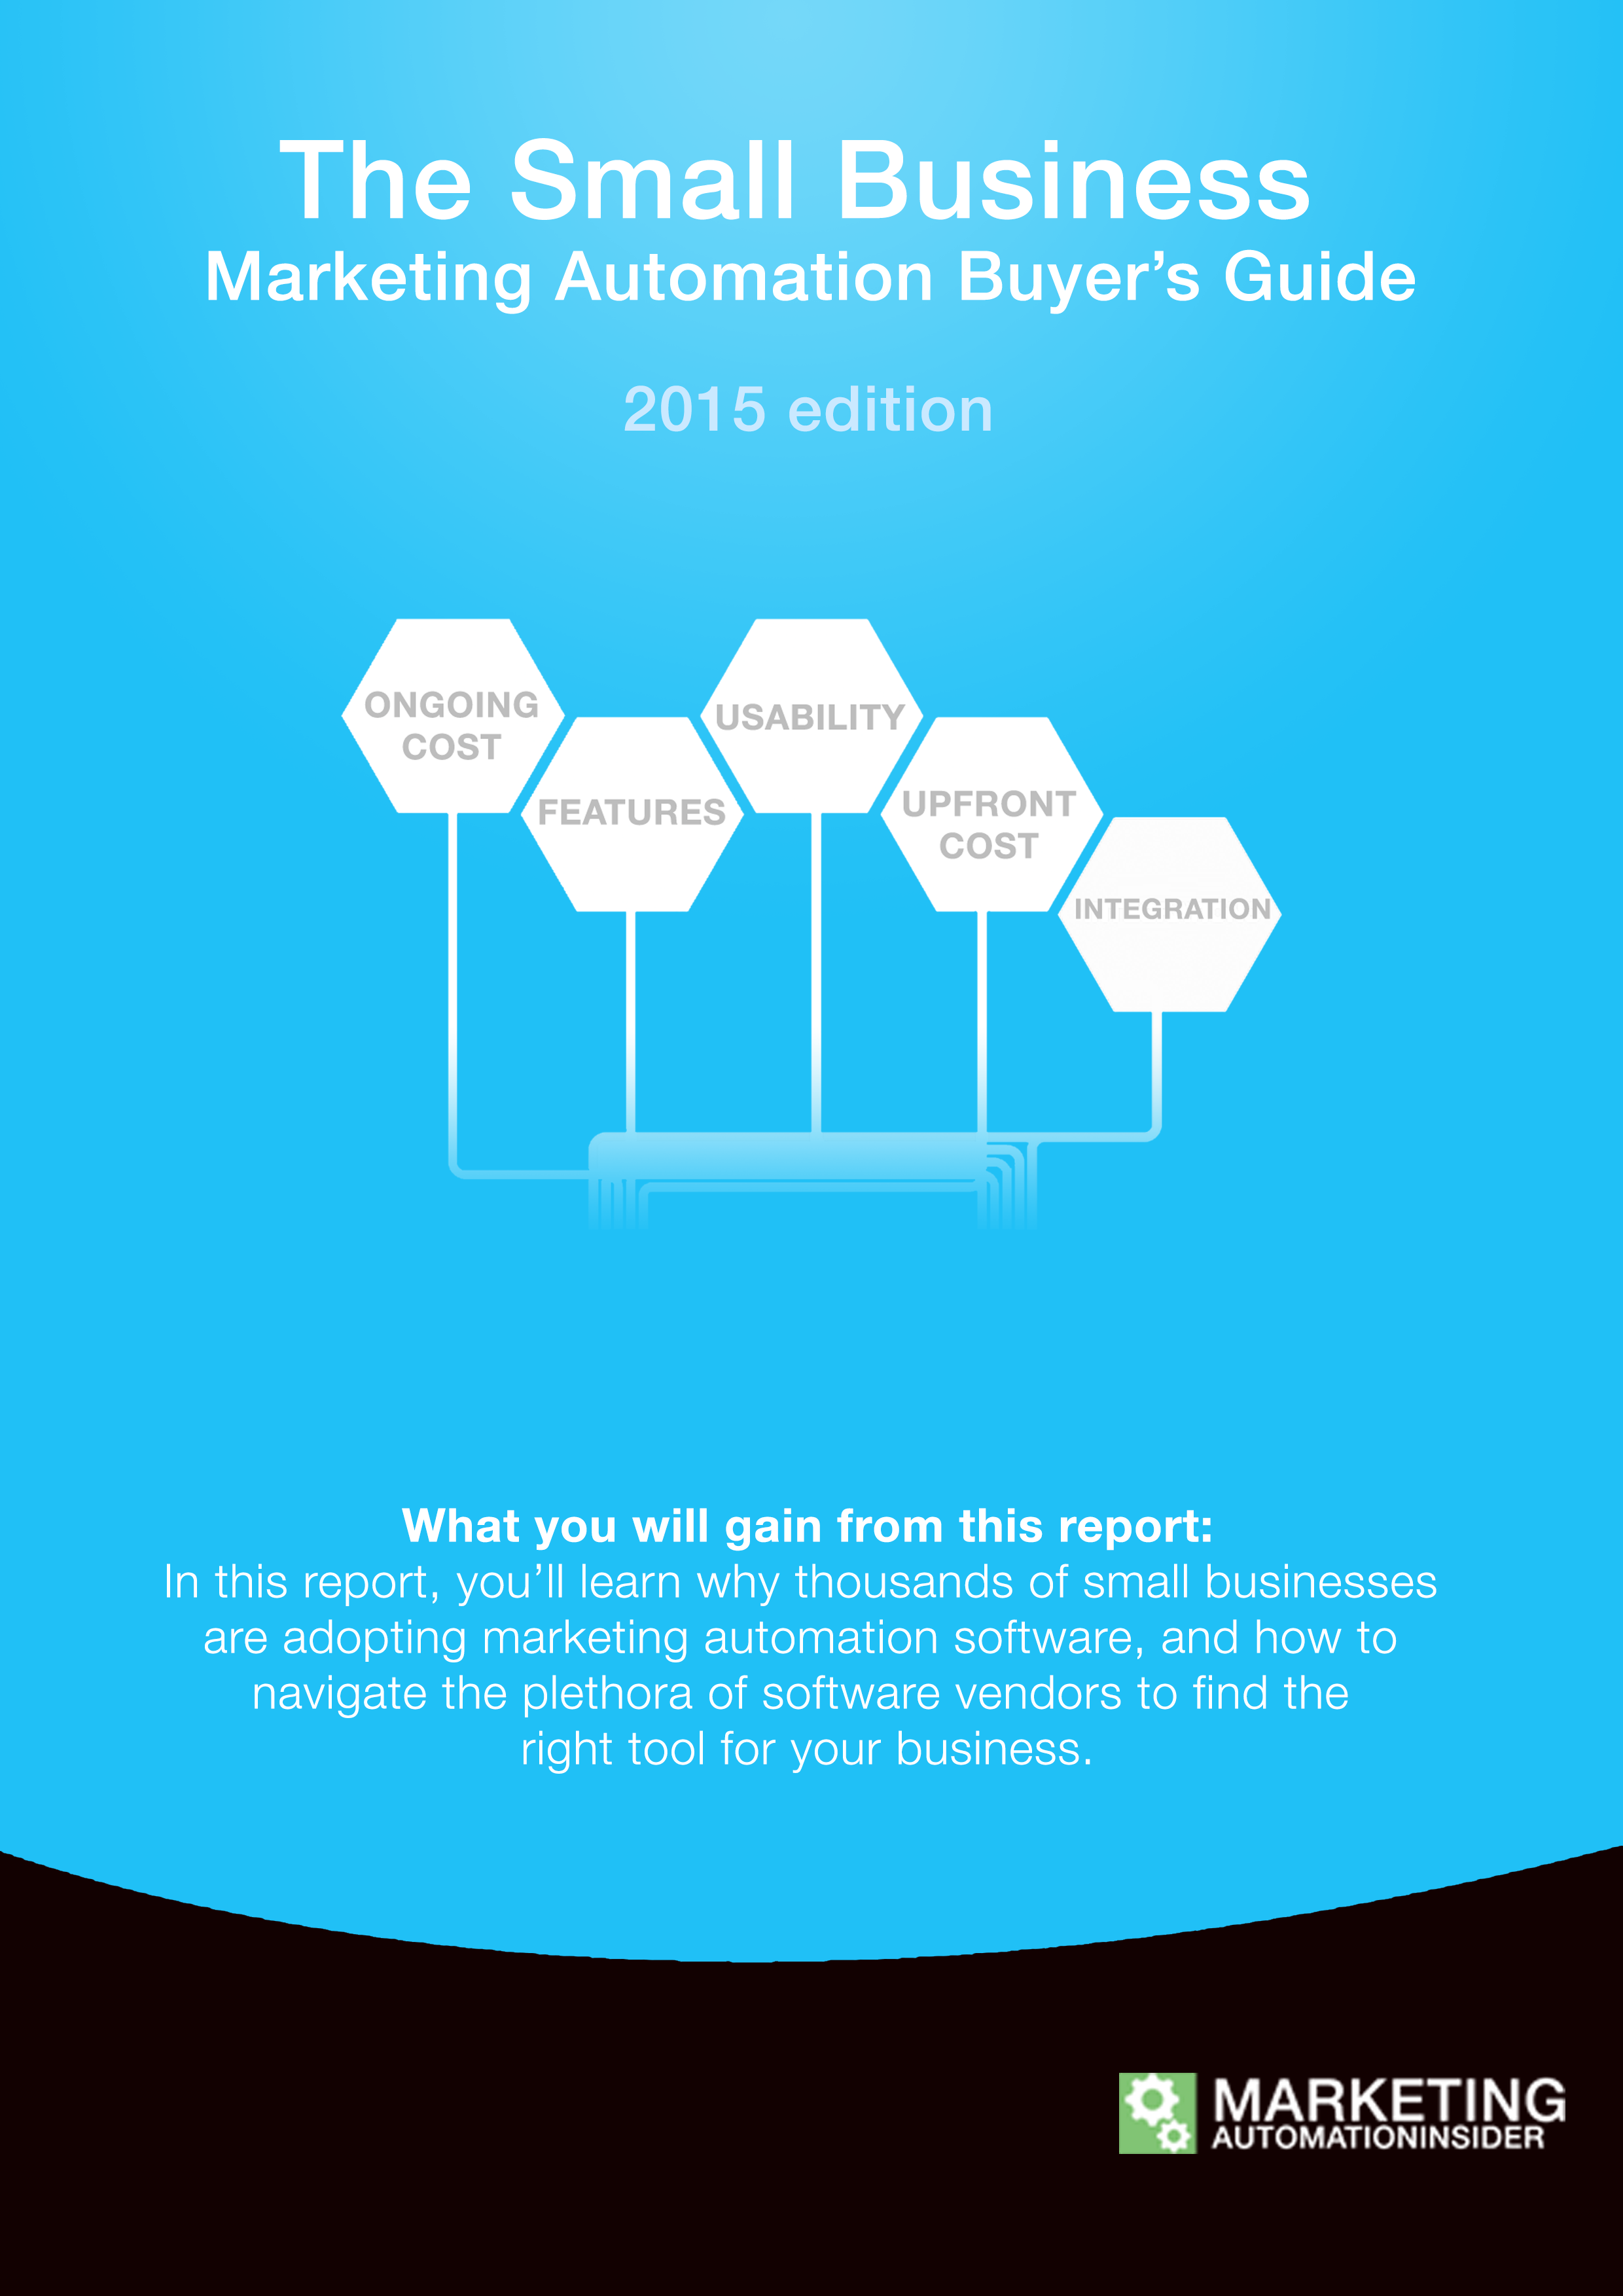 2015 Small Business Marketing Automation Buyer's Guide